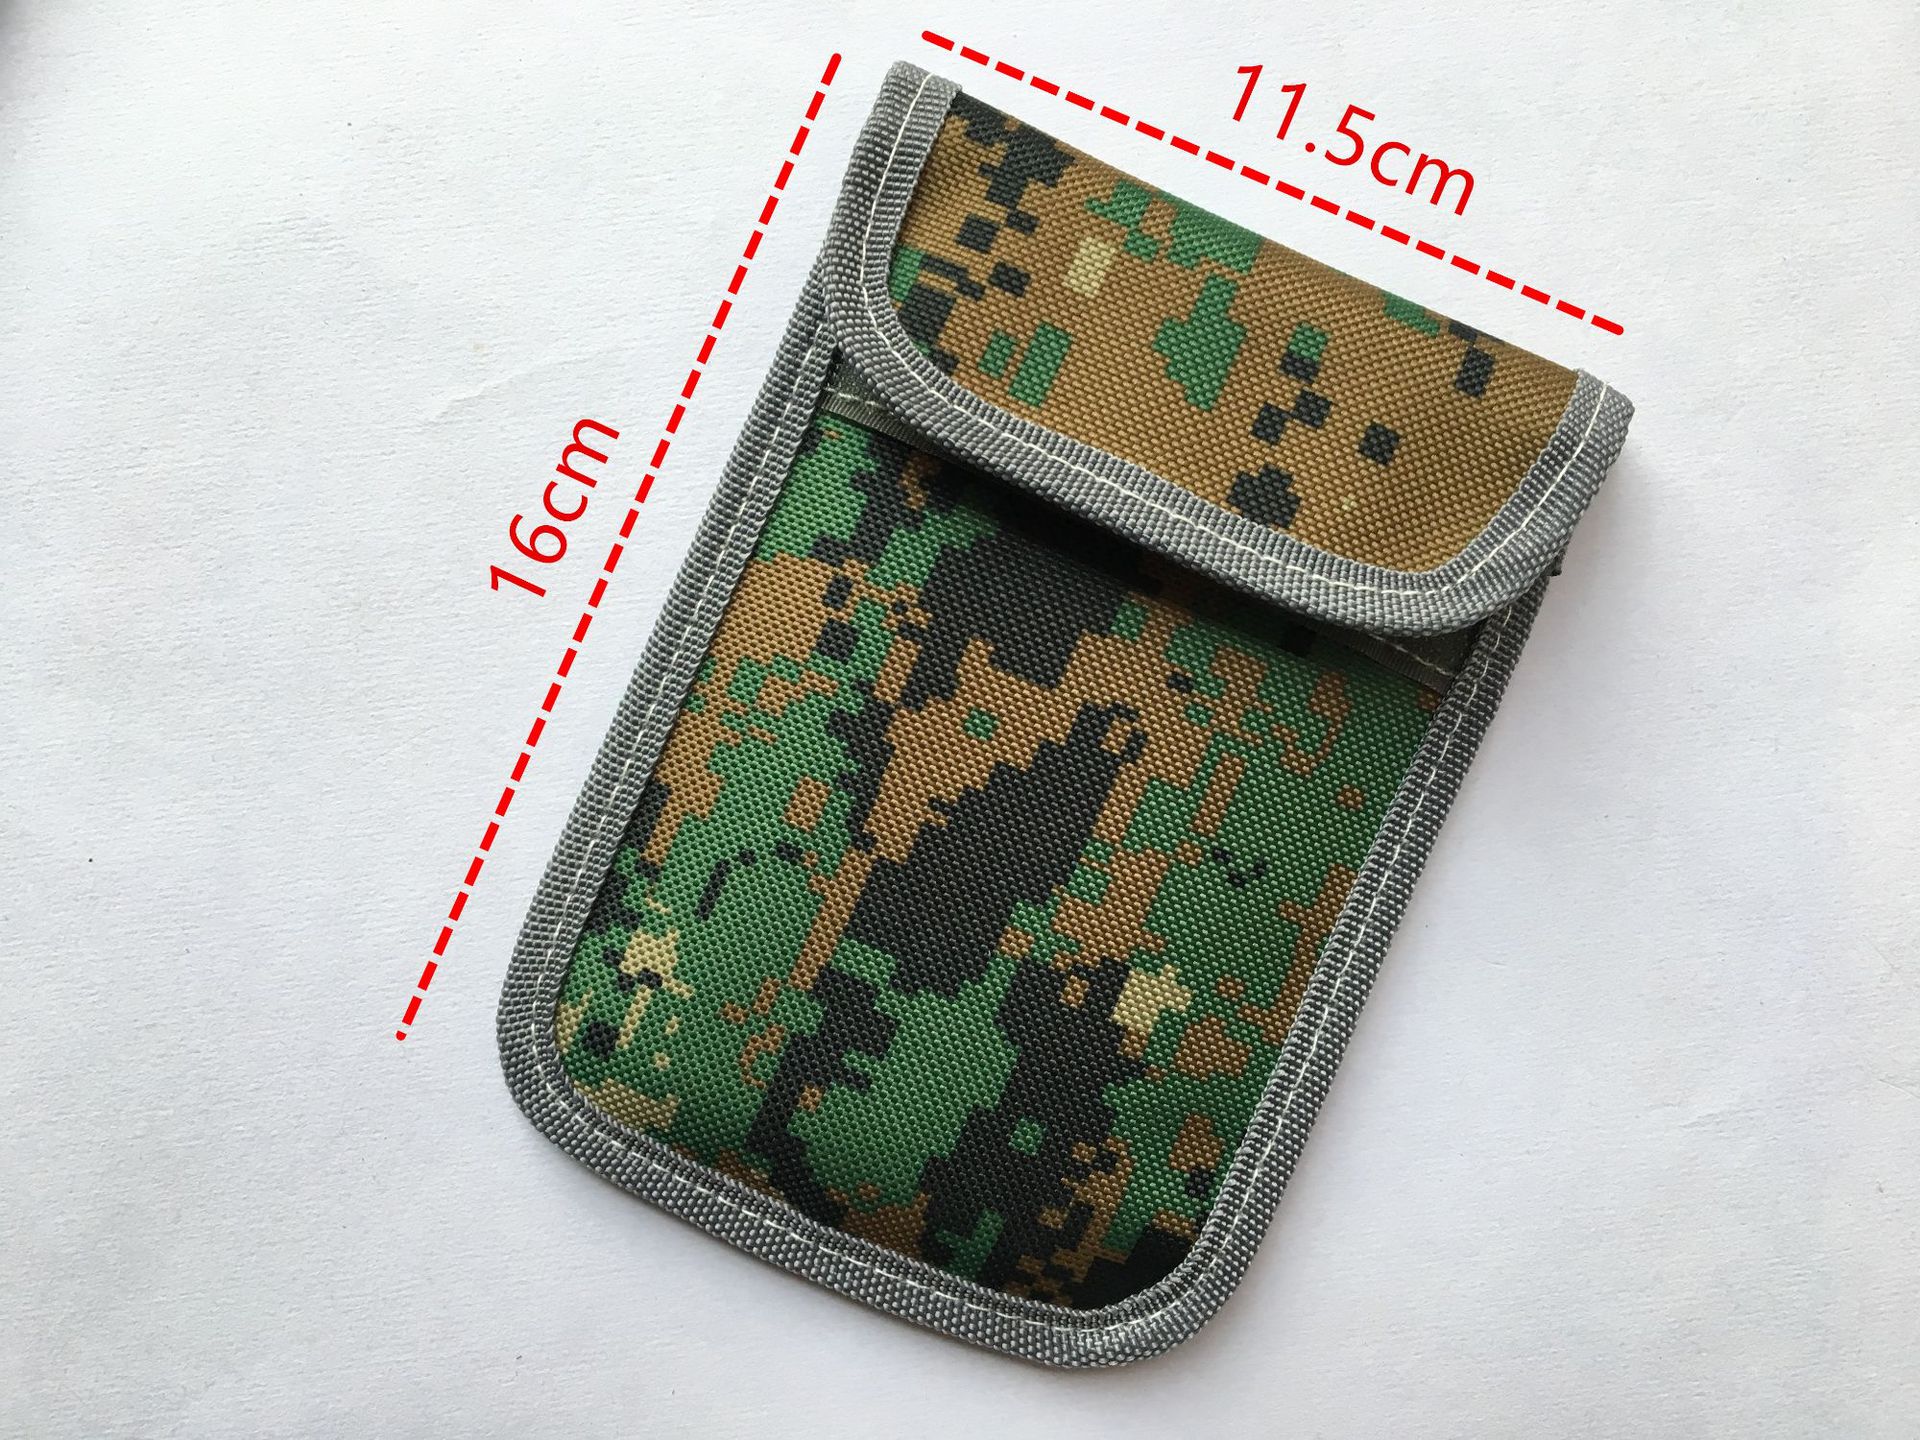 PB08 Camouflage Military Mobile Phone Radiation-proof Signal Shielding Bag Rfid Scanning-proof And Degaussing-proof Card Pack Key